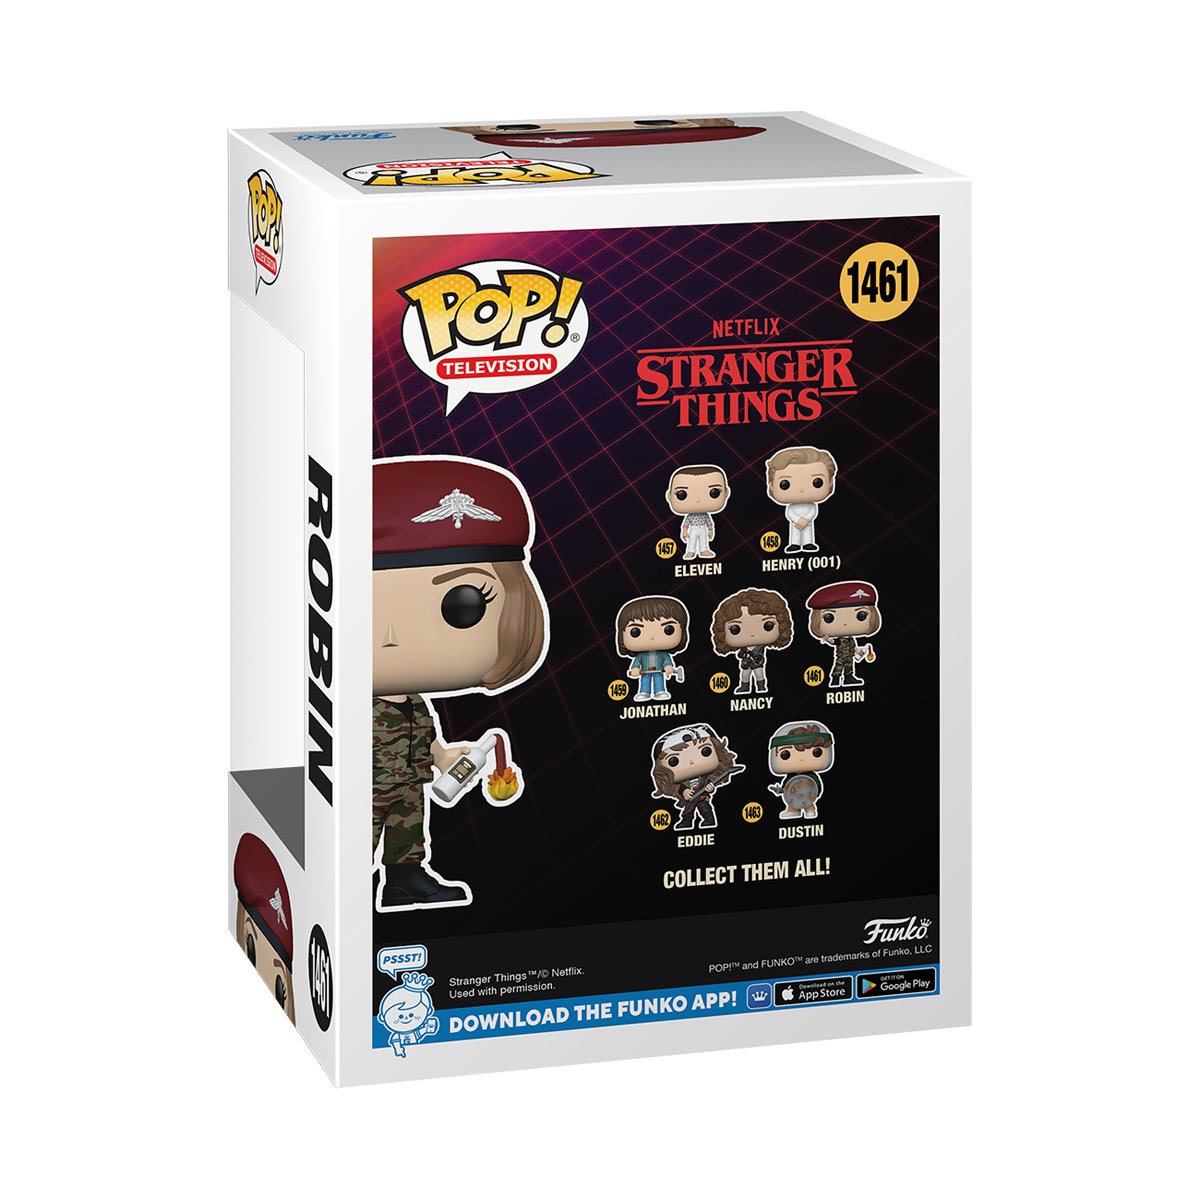 Stranger Things Season 4 Robin with Cocktail Funko Pop! Vinyl Figure - Hyperdrive Collector Zone